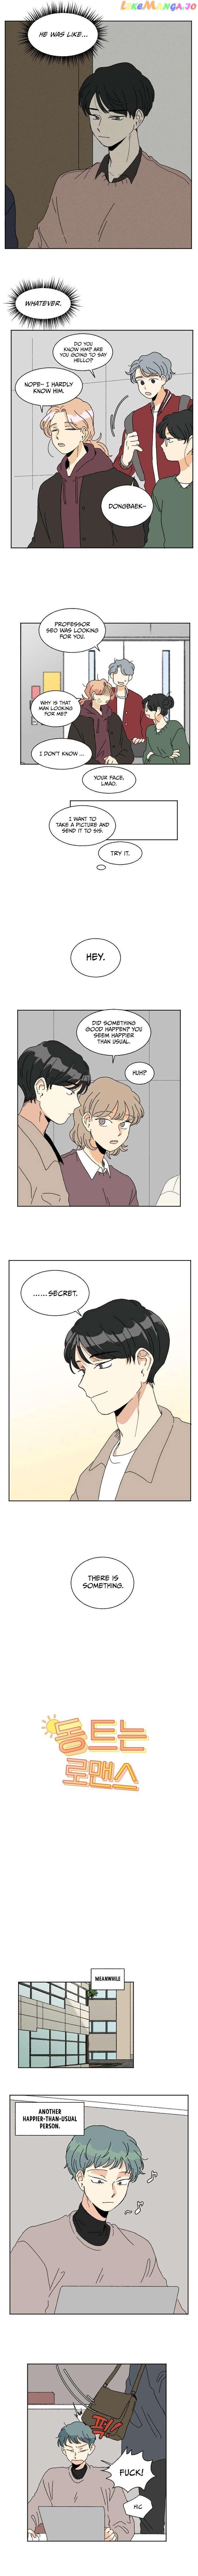 Daybreaking Romance Chapter 51 - Page 2